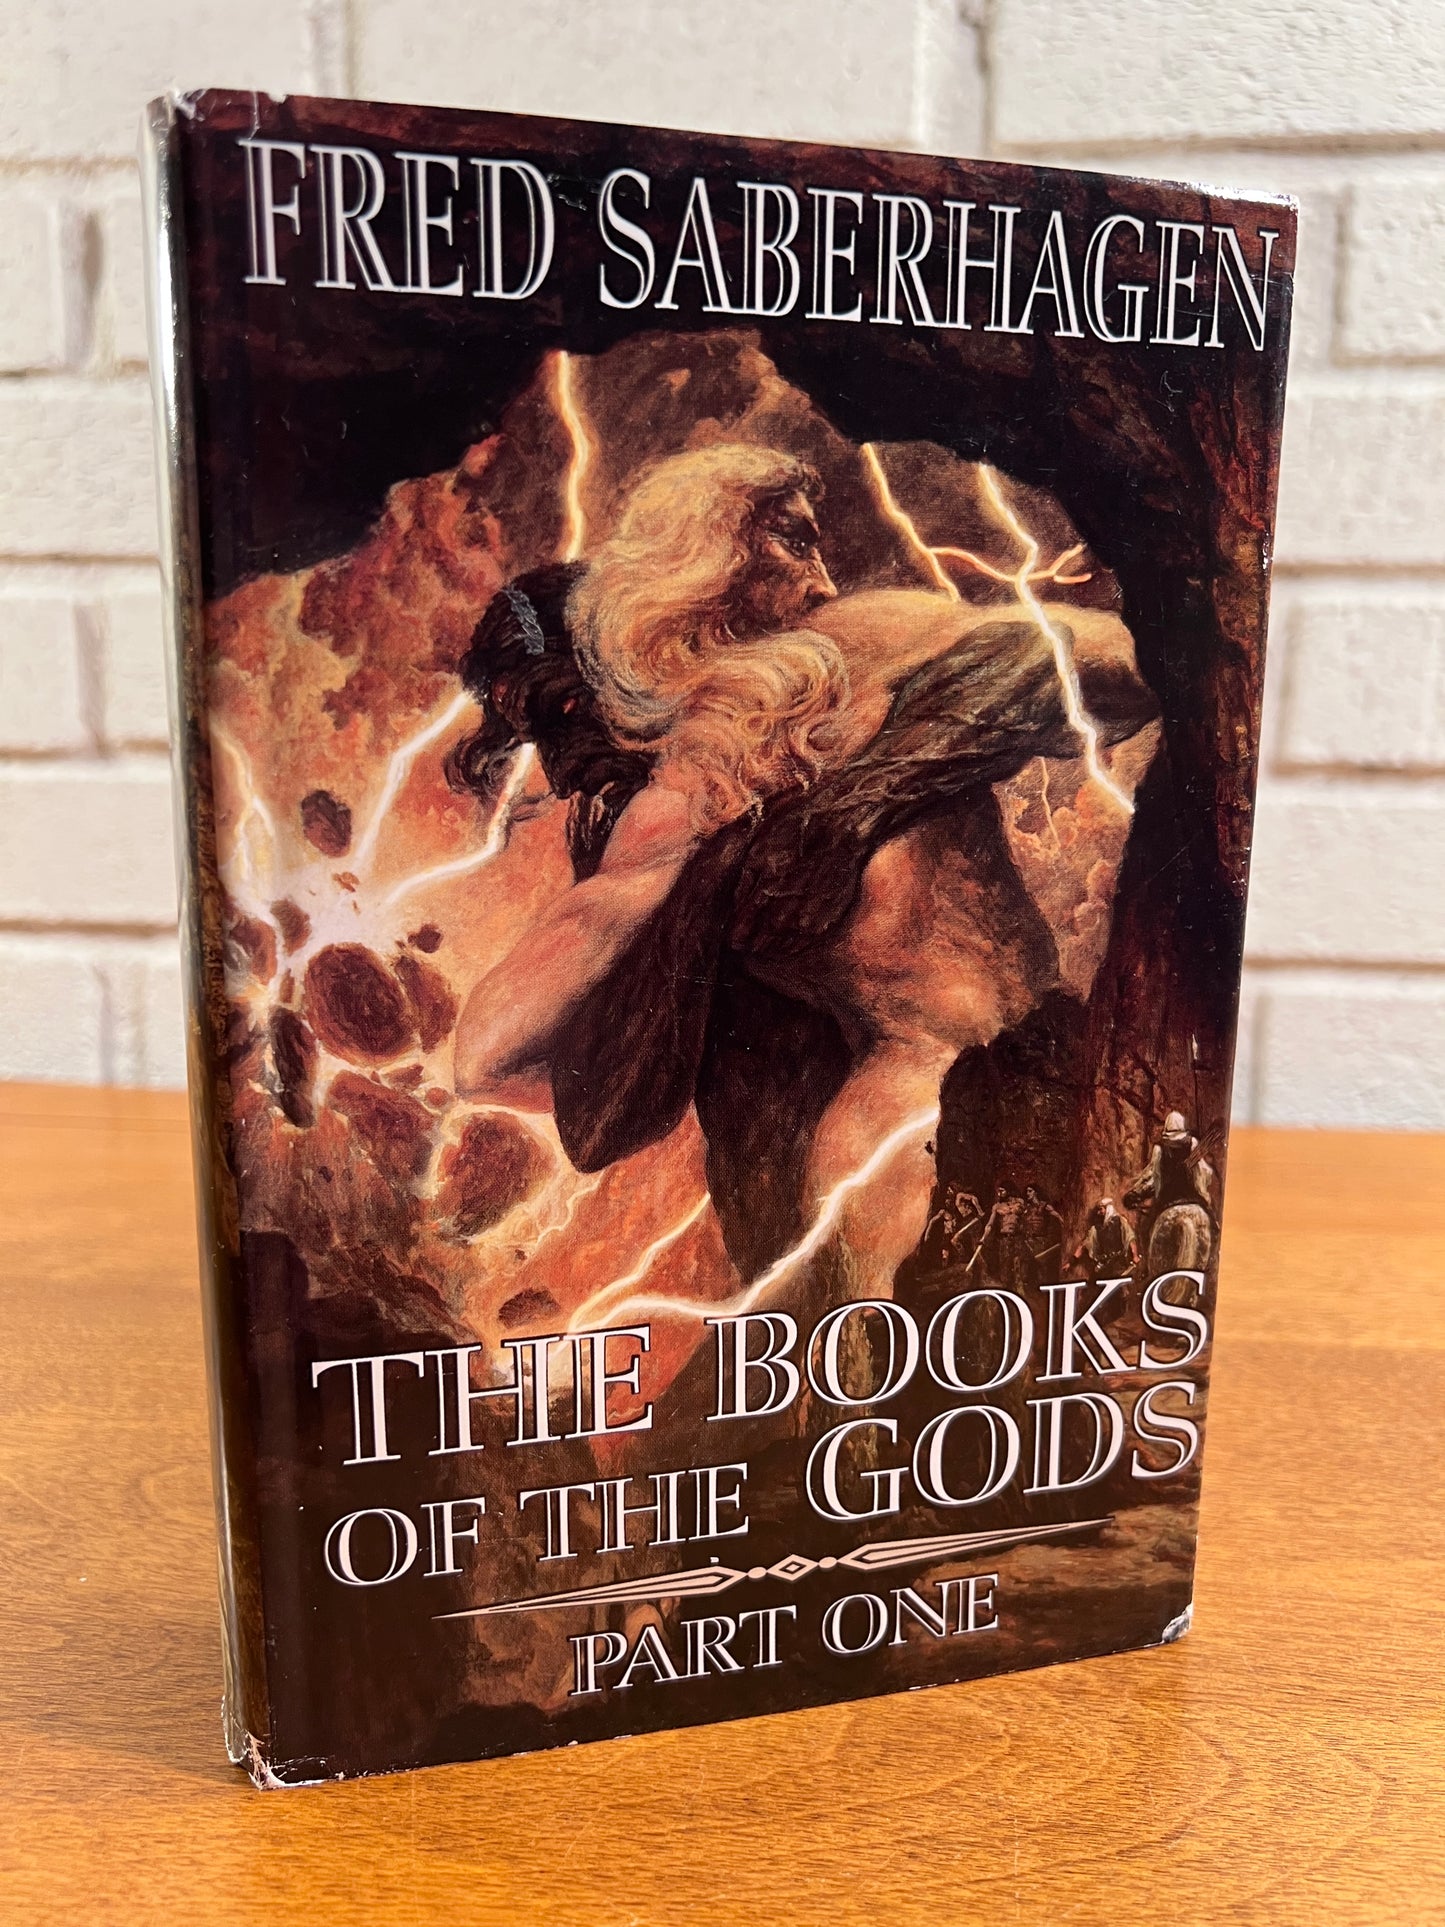 The Books of the Gods, Part One by Fred Saberhagen